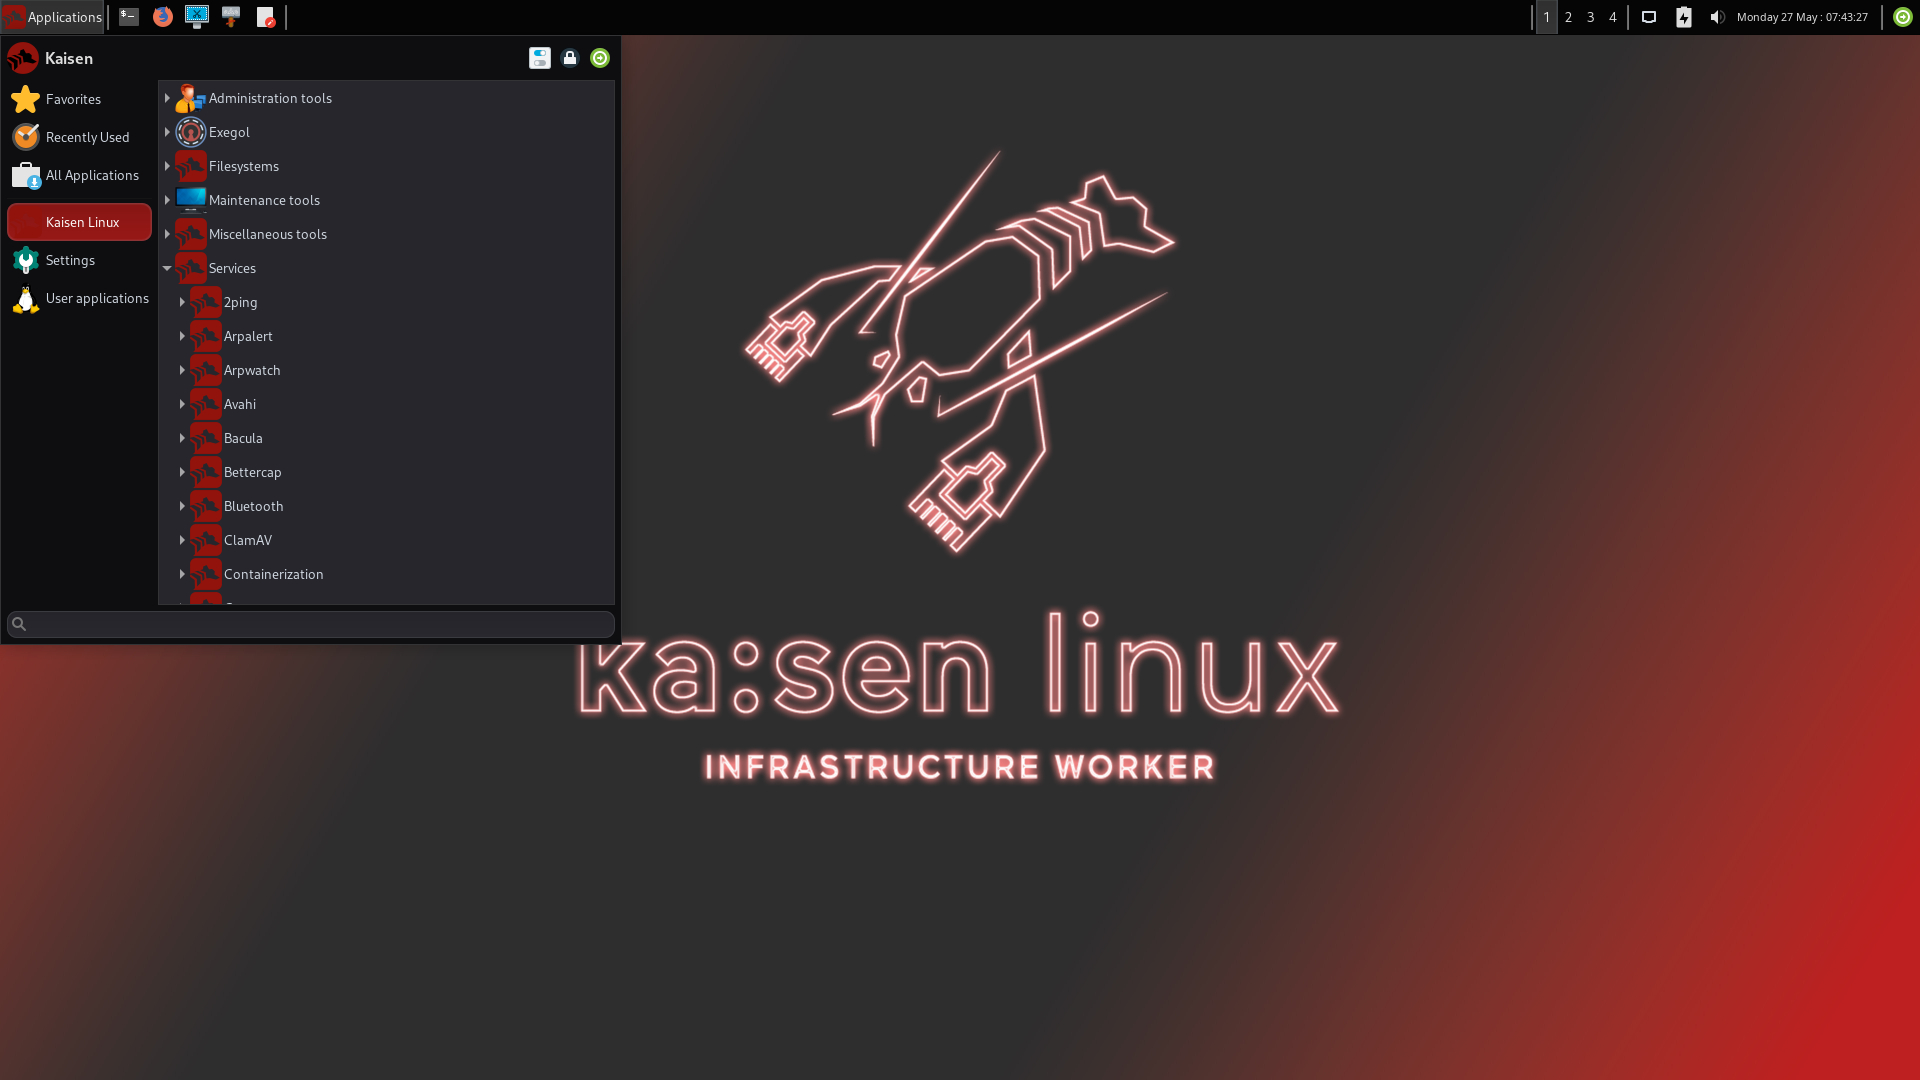 kaisen linux xfce with services menu